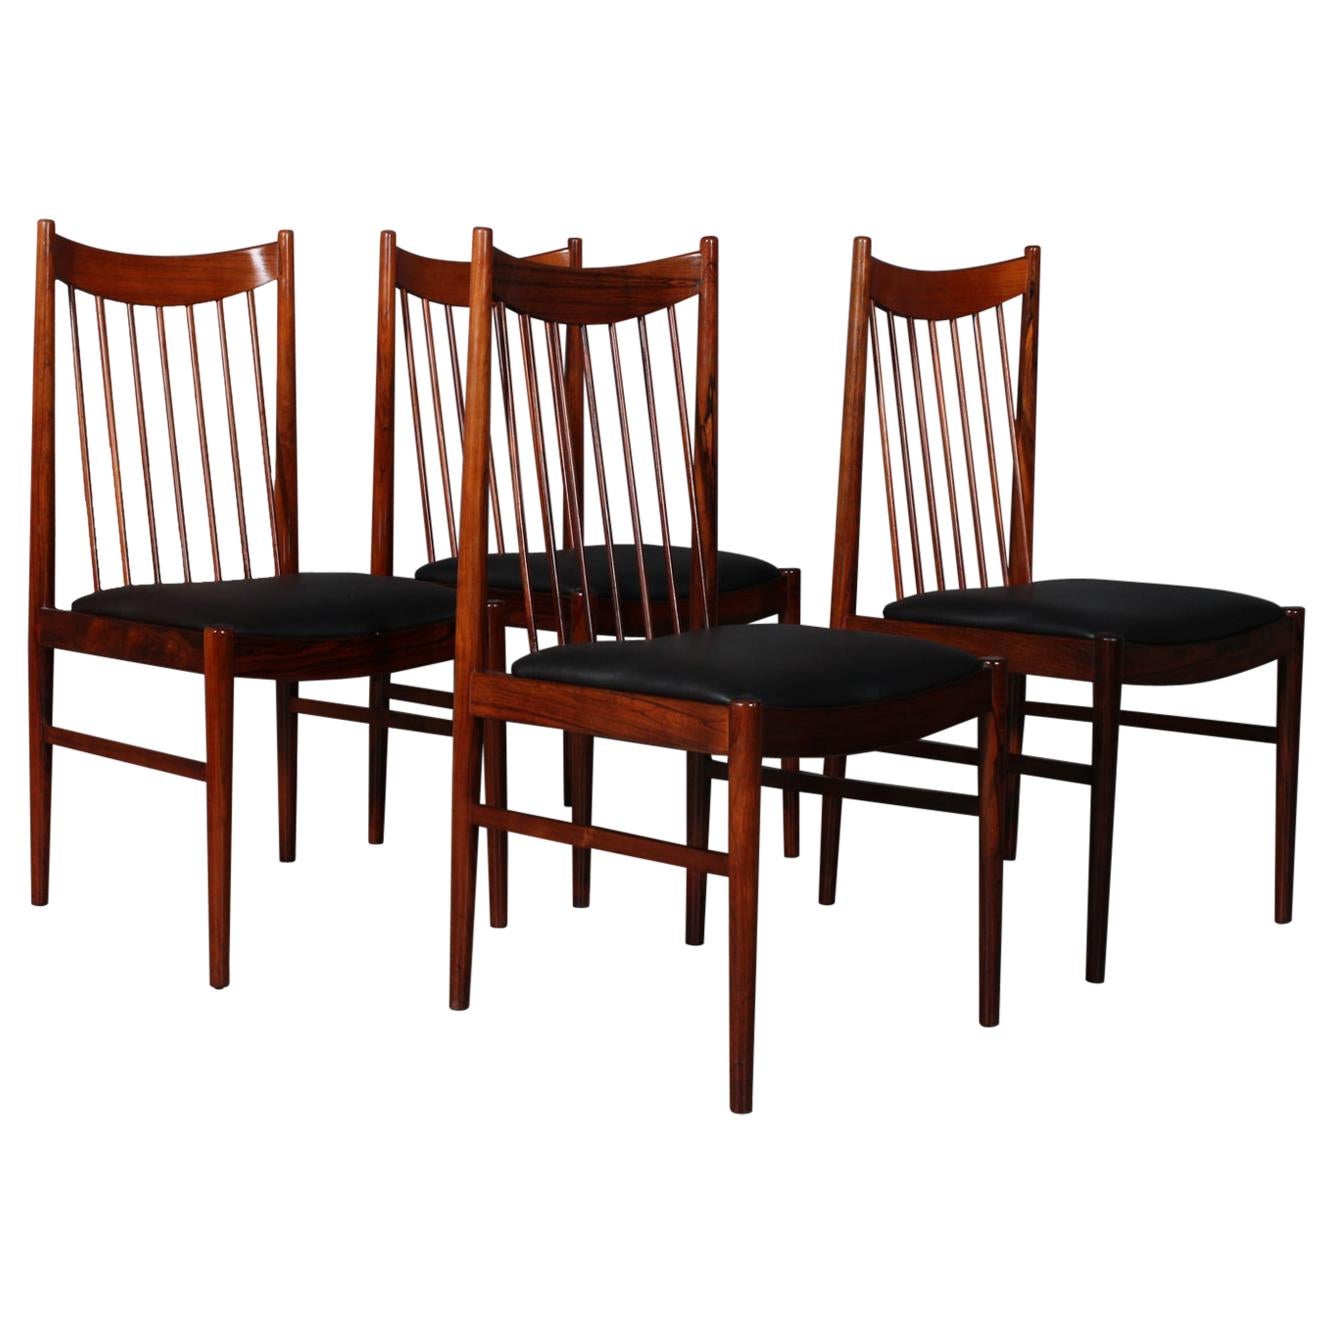 Set of Arne Vodder Rosewood Chairs, Model 422, Made by Sibast